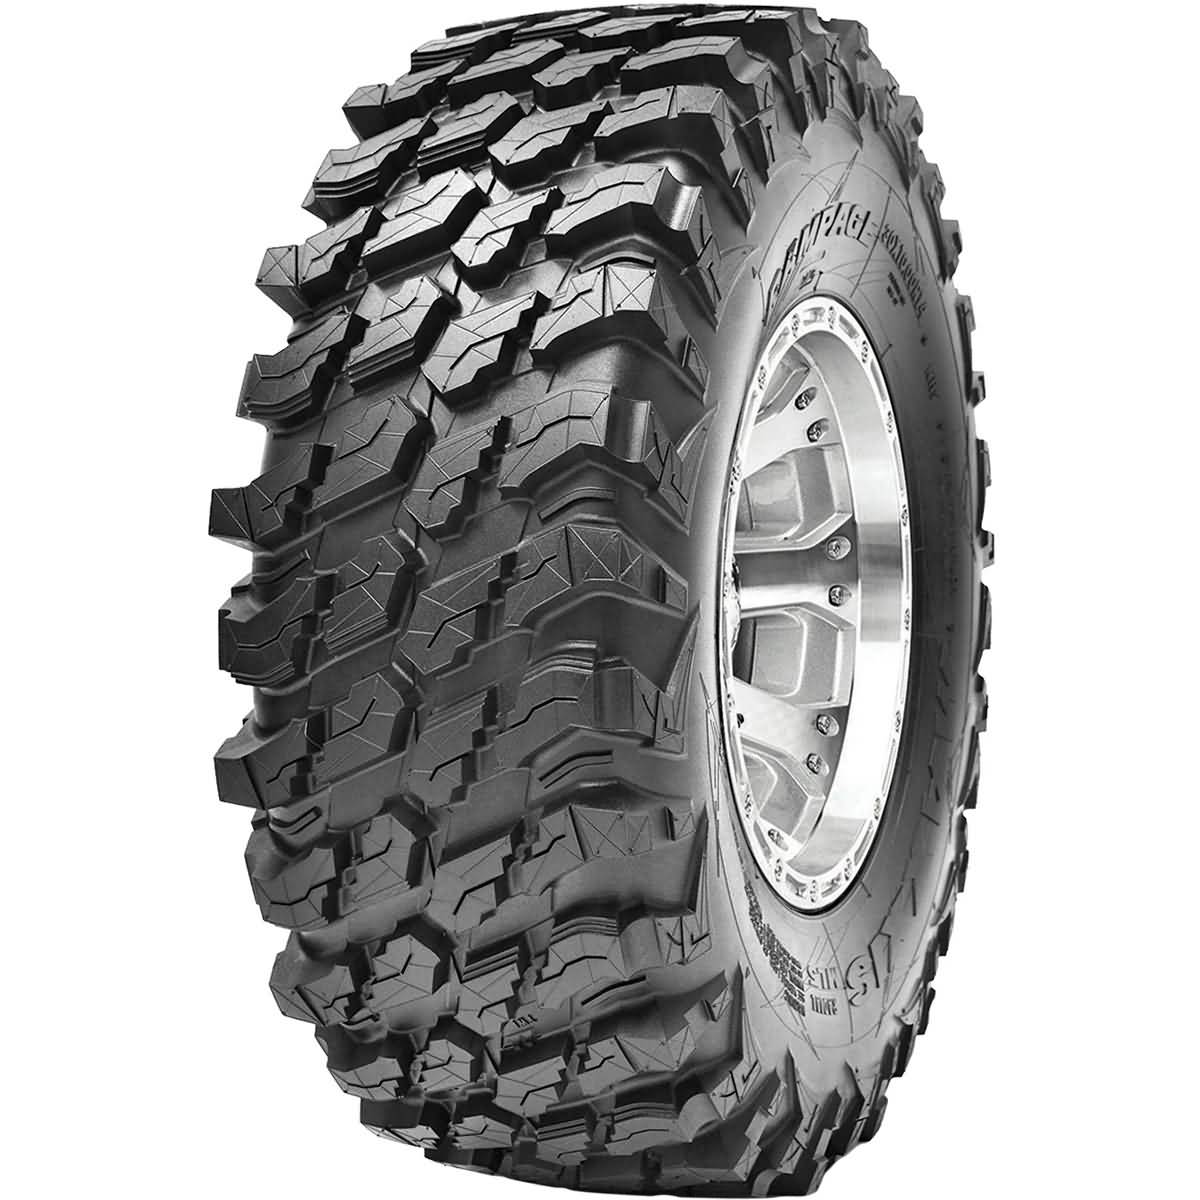 Maxxis Rampage 14" Rear Off-Road Tires-577